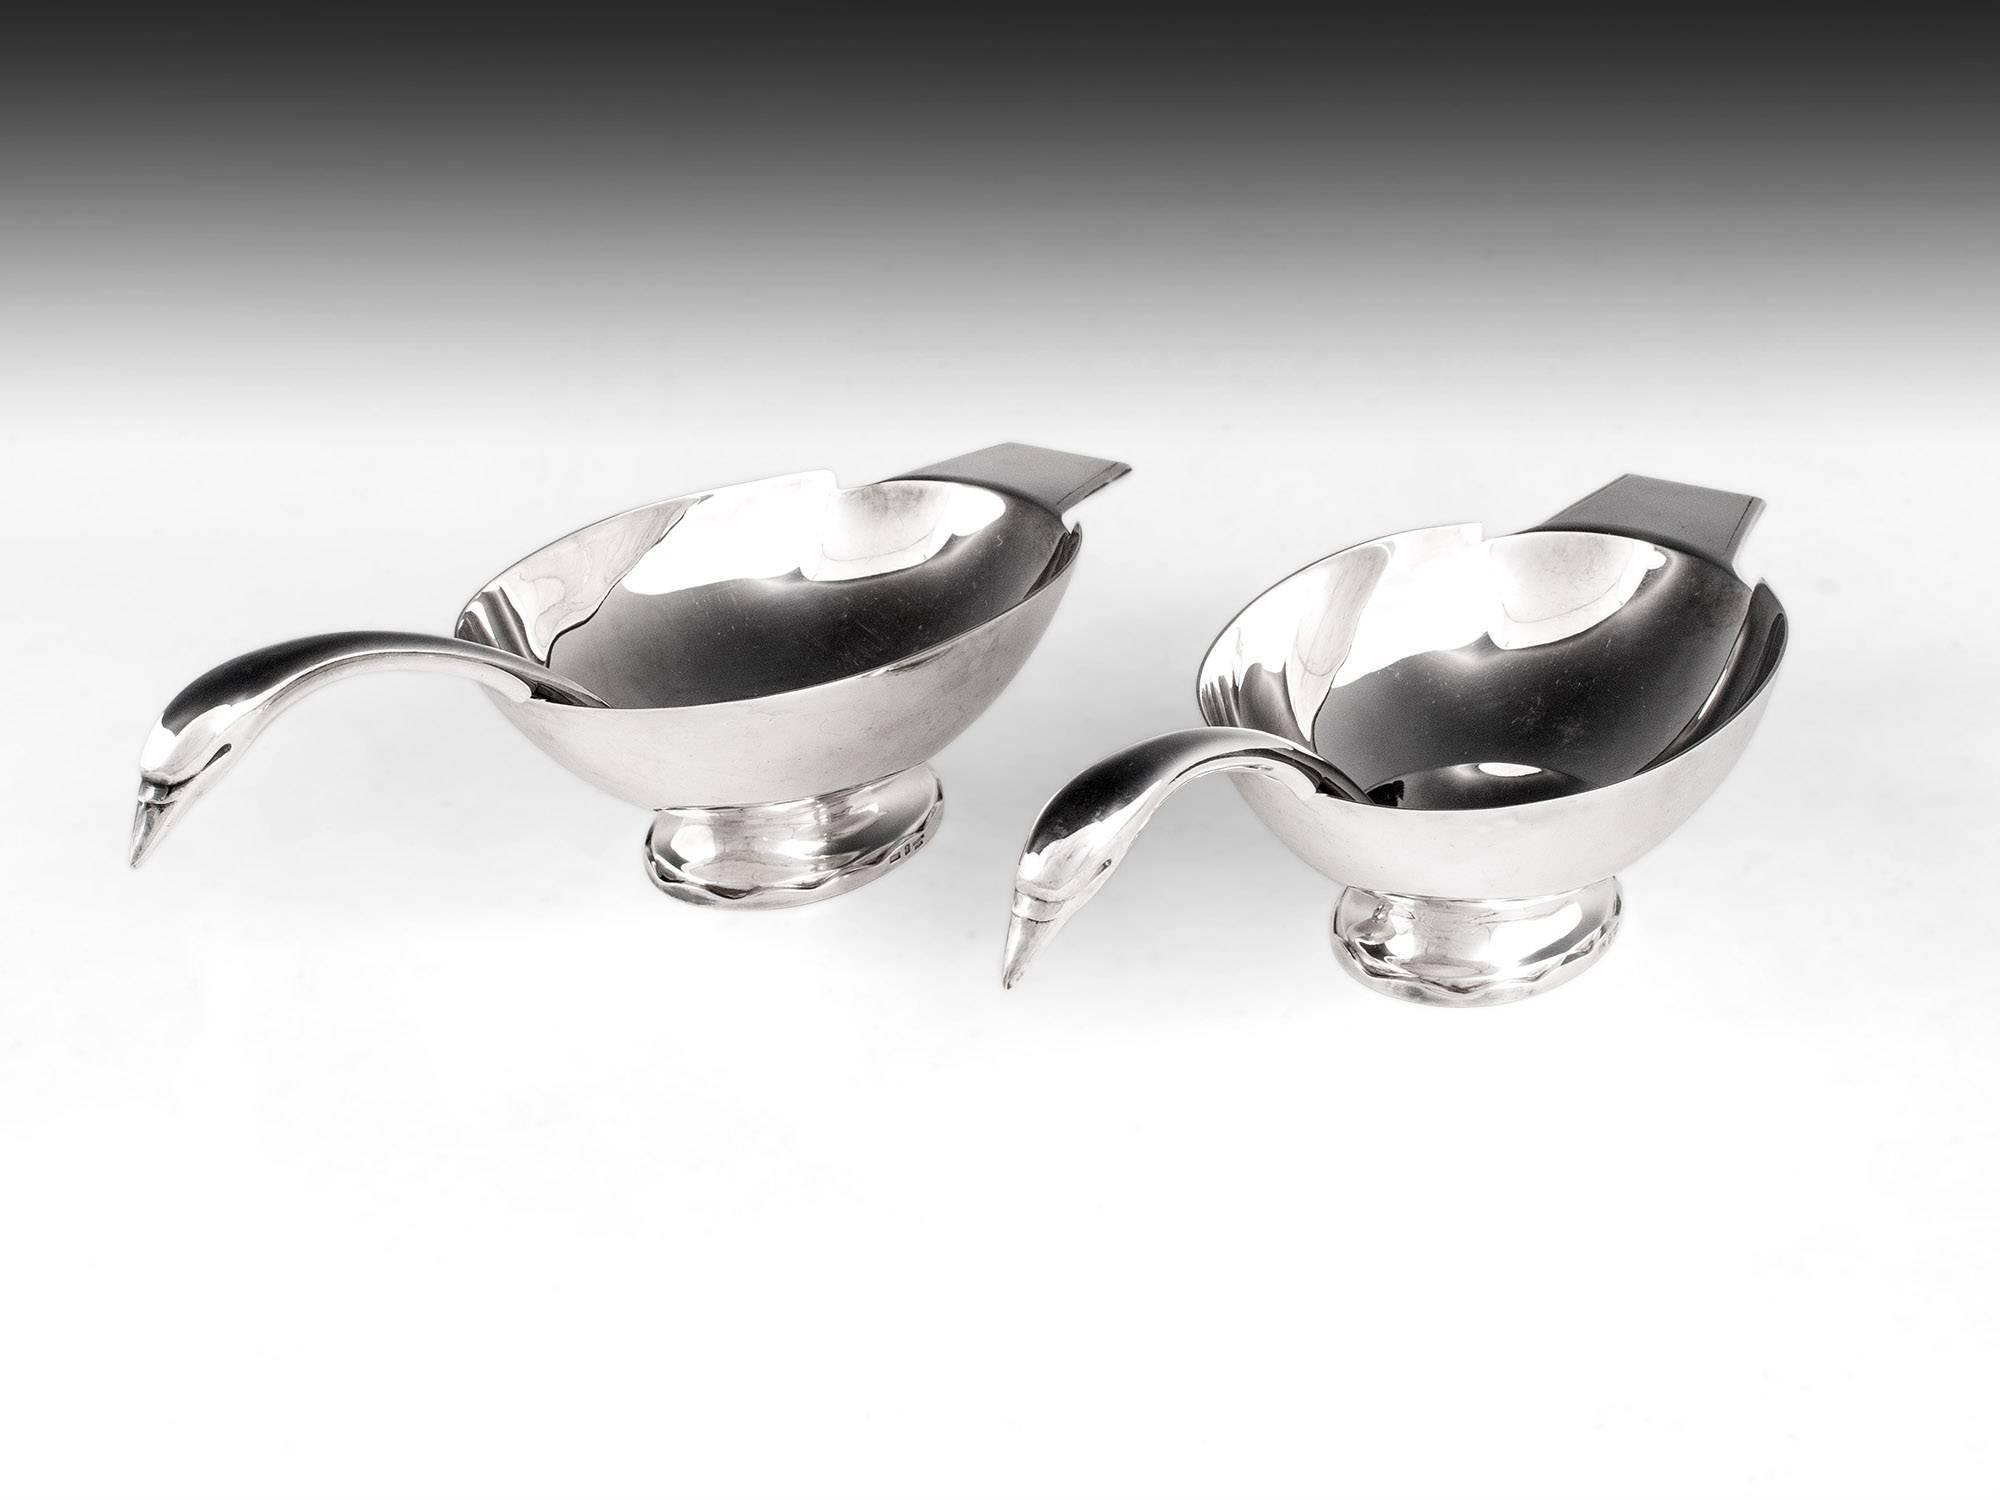 Art Deco Christofle Silver Plate Swan Sauce Boats by Christian Fjerdingstad